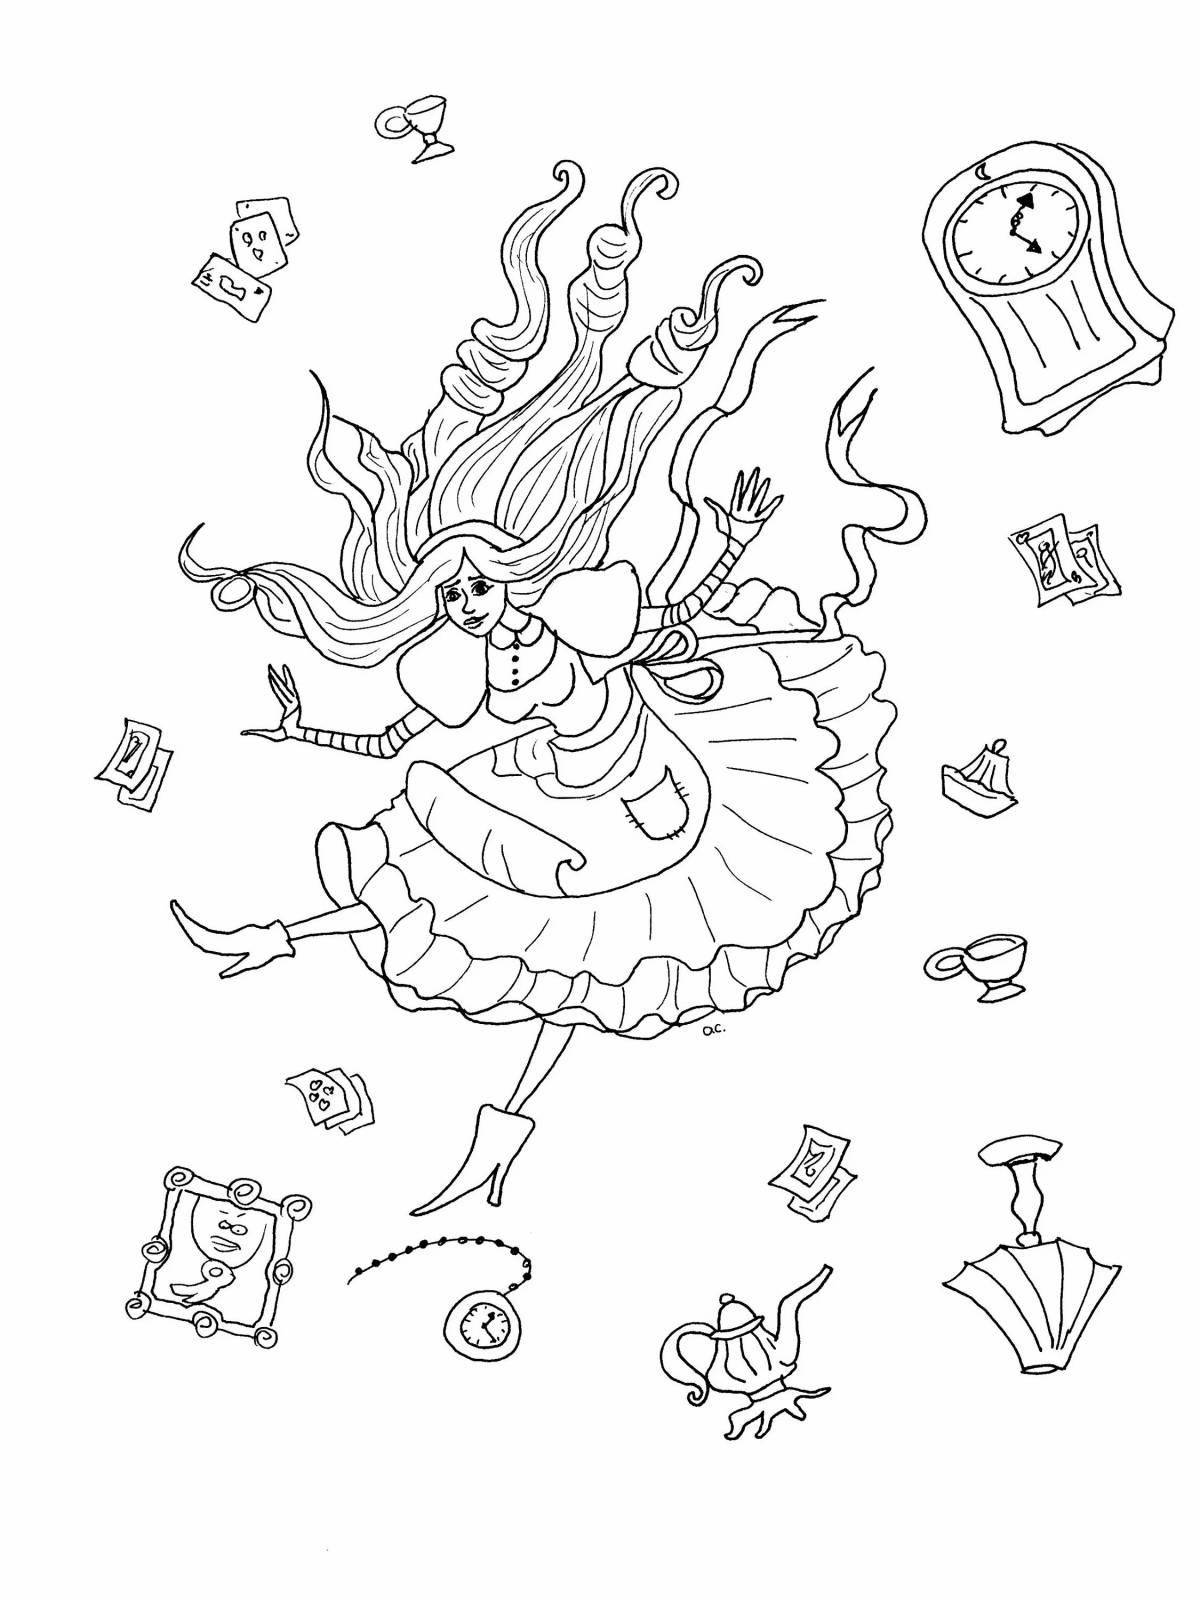 Alice Charming in Wonderland coloring page